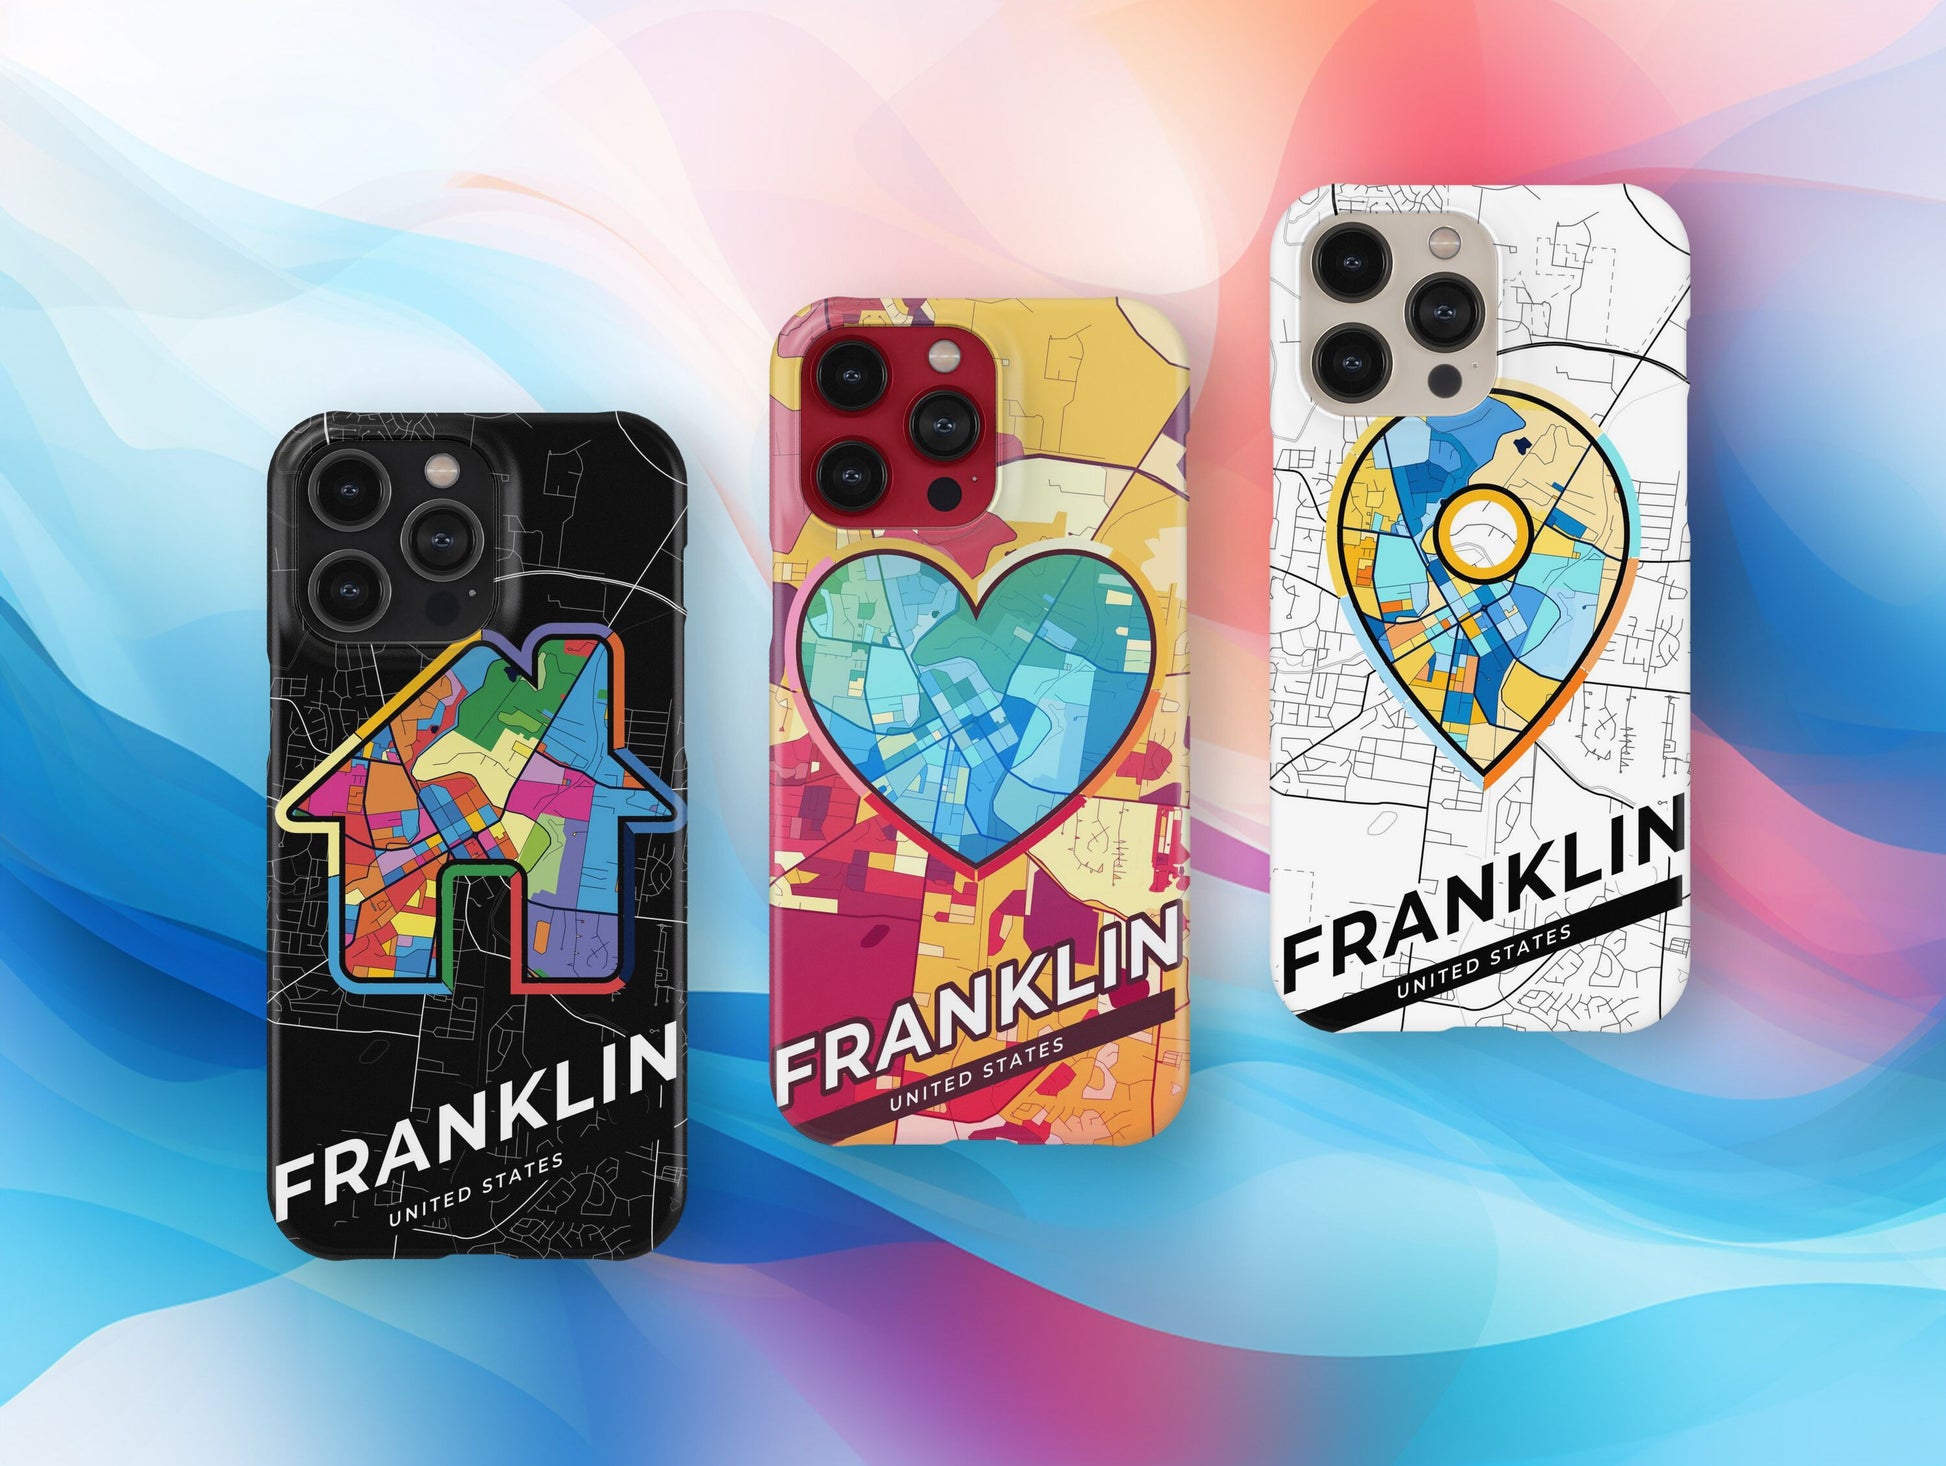 Franklin Tennessee slim phone case with colorful icon. Birthday, wedding or housewarming gift. Couple match cases.